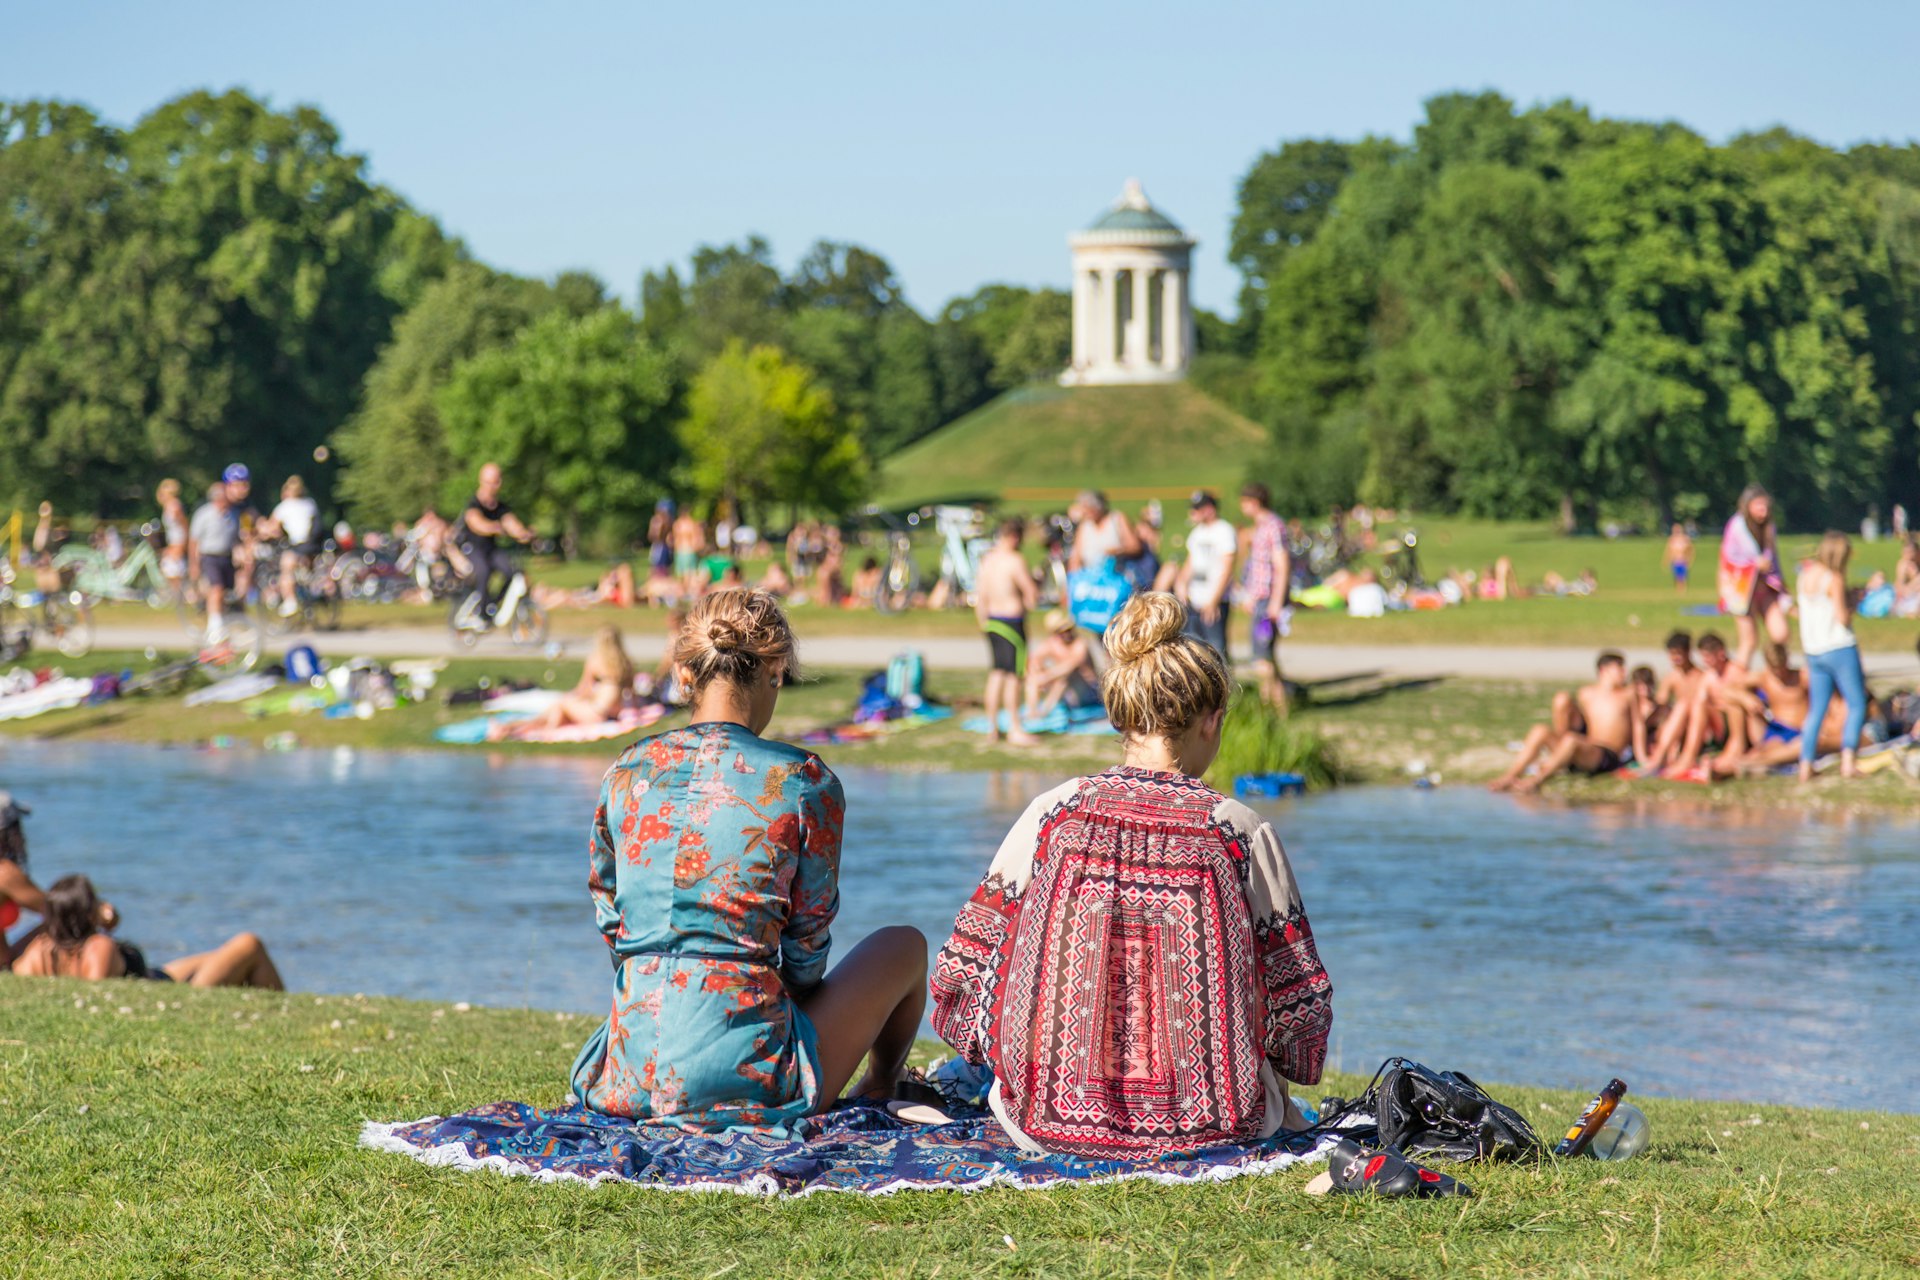 Two girls sitting on a blanket at English Garden (Englischer Garten) with a crowd of others in the background